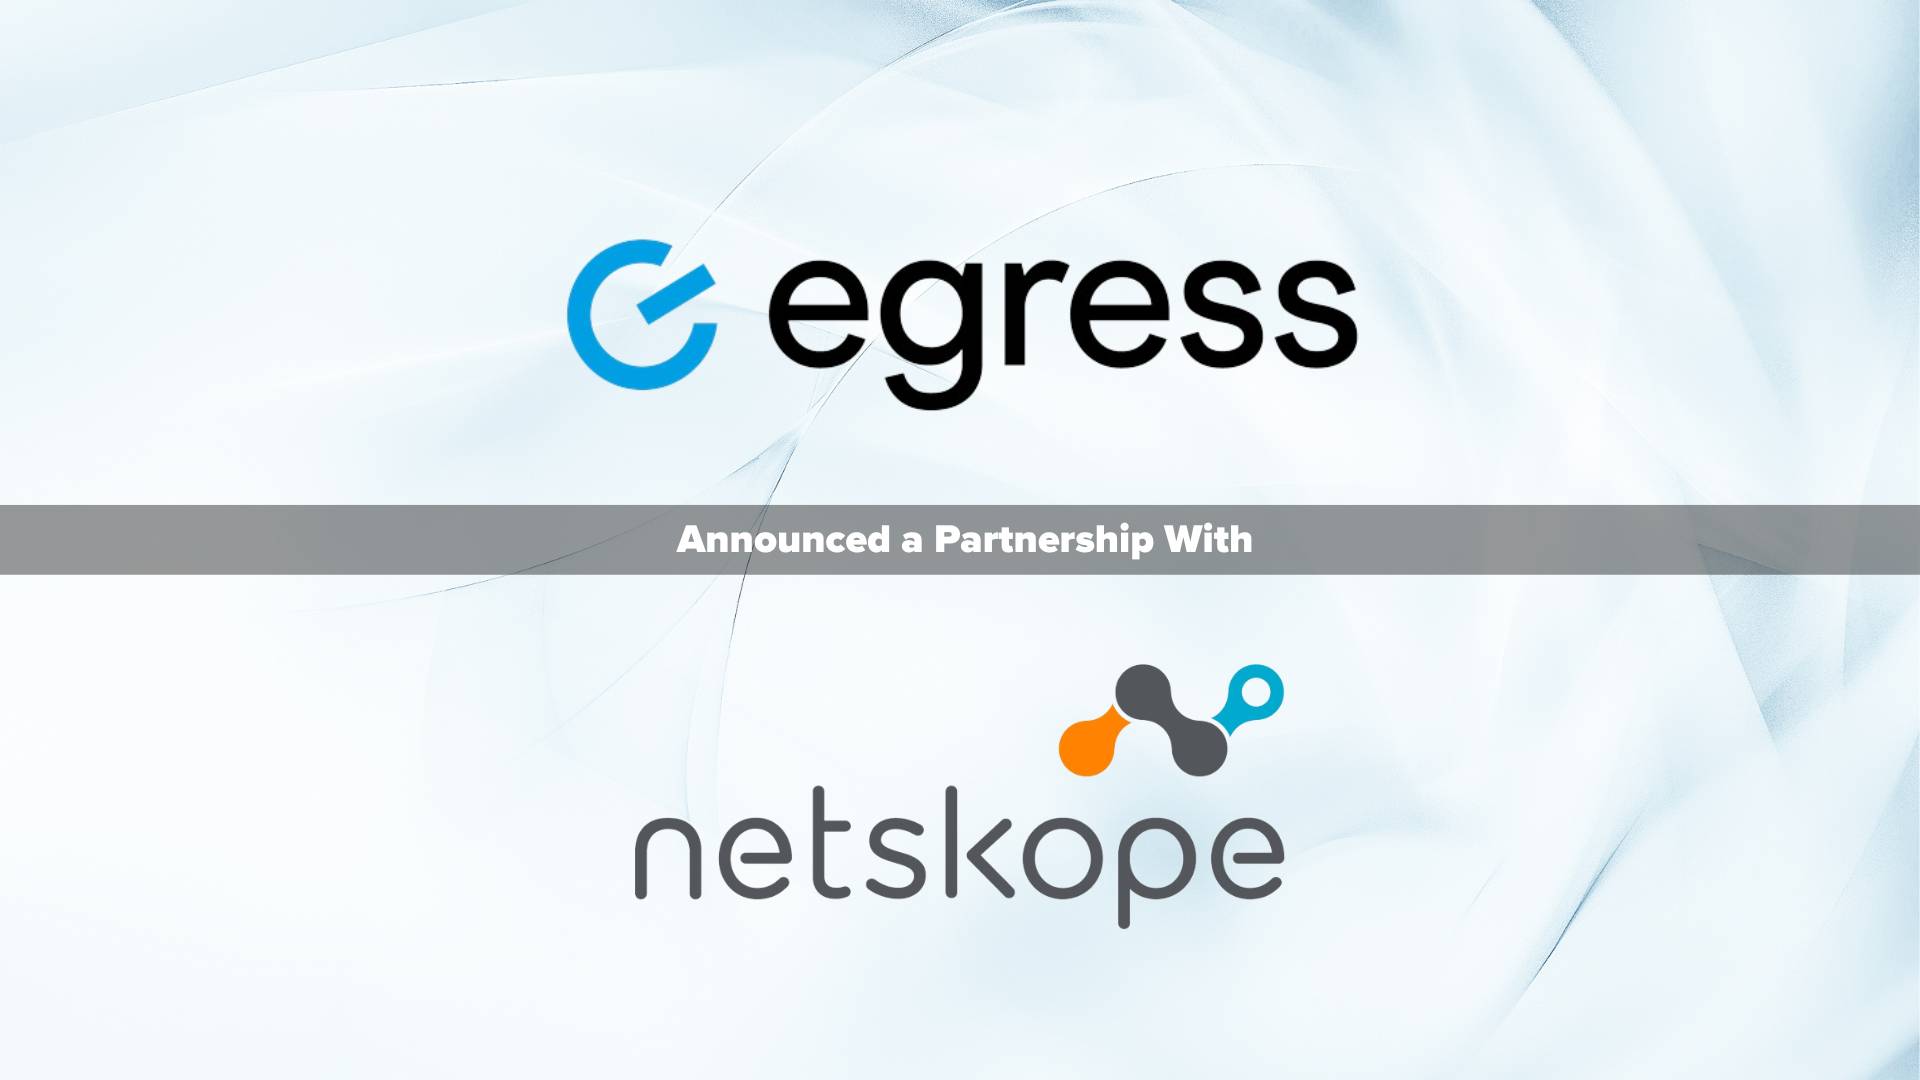 Netskope and Egress launch new partnership to reshape behavioral-based threat detection and response